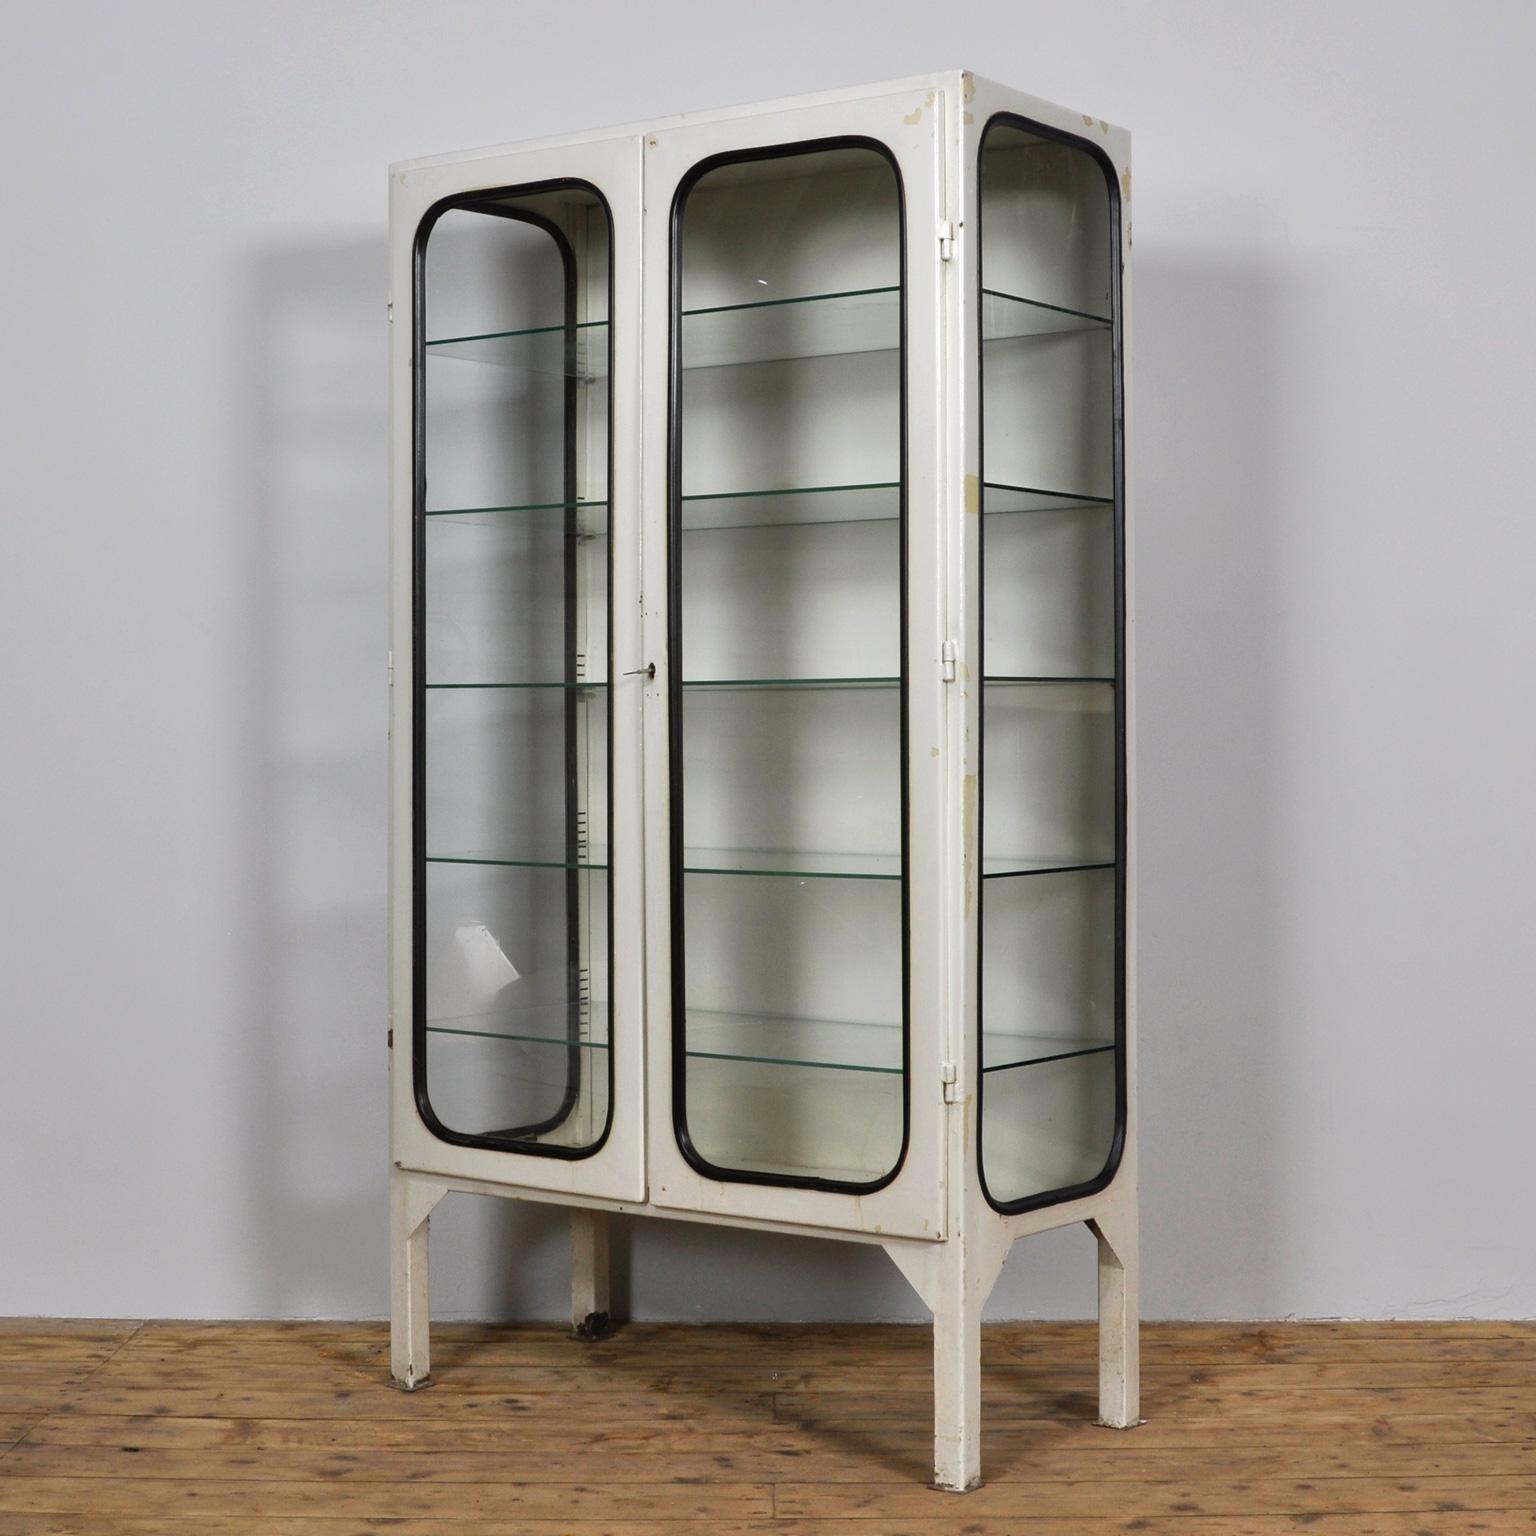 This medicine cabinet was designed in the 1970s and was produced circa 1975 in Hungary. It is made from iron and glass, and the glass is held by a black rubber strip. The cabinet features five adjustable glass shelves and functioning lock. Came out